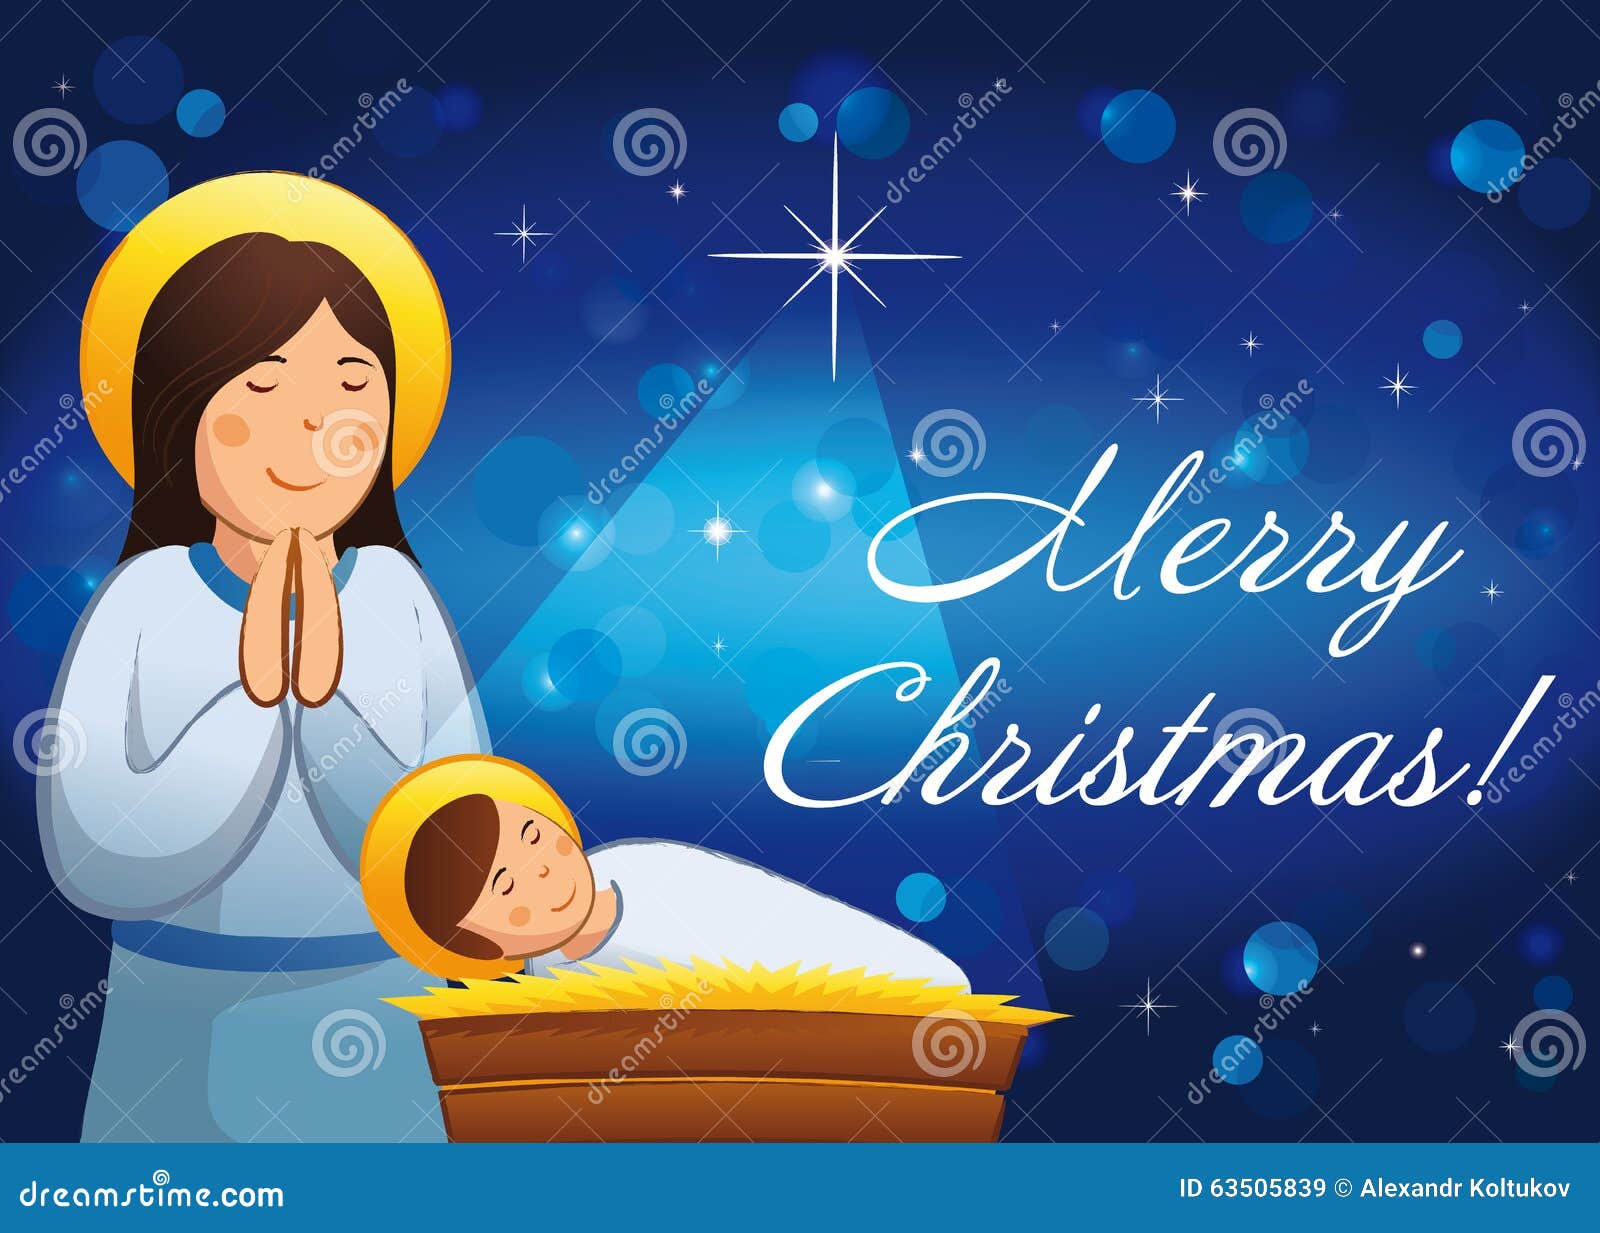 Merry Christmas Cards Stock Vector Illustration Of Card 63505839